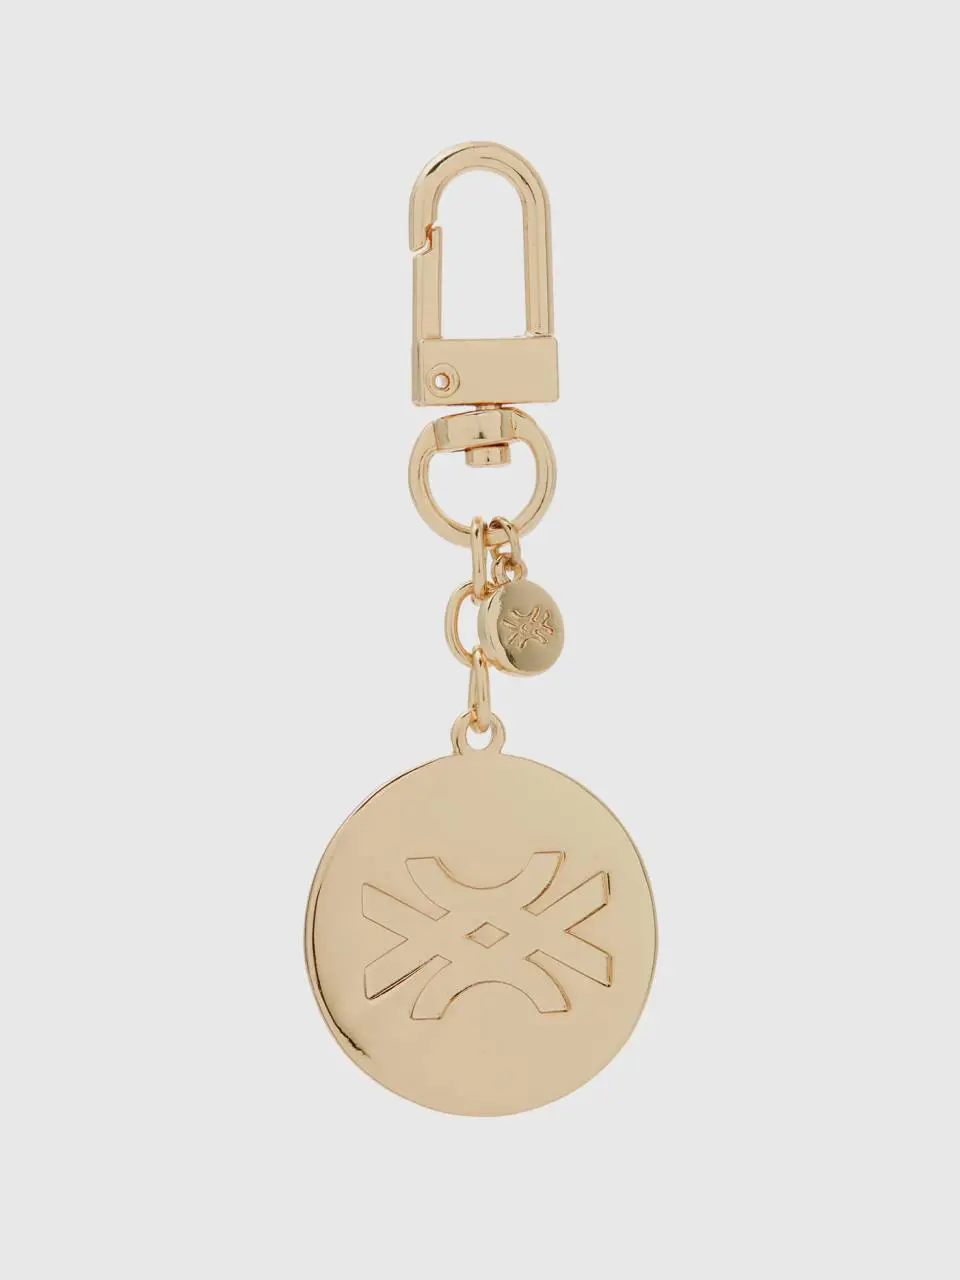 Benetton gold keychain with pendant. 1